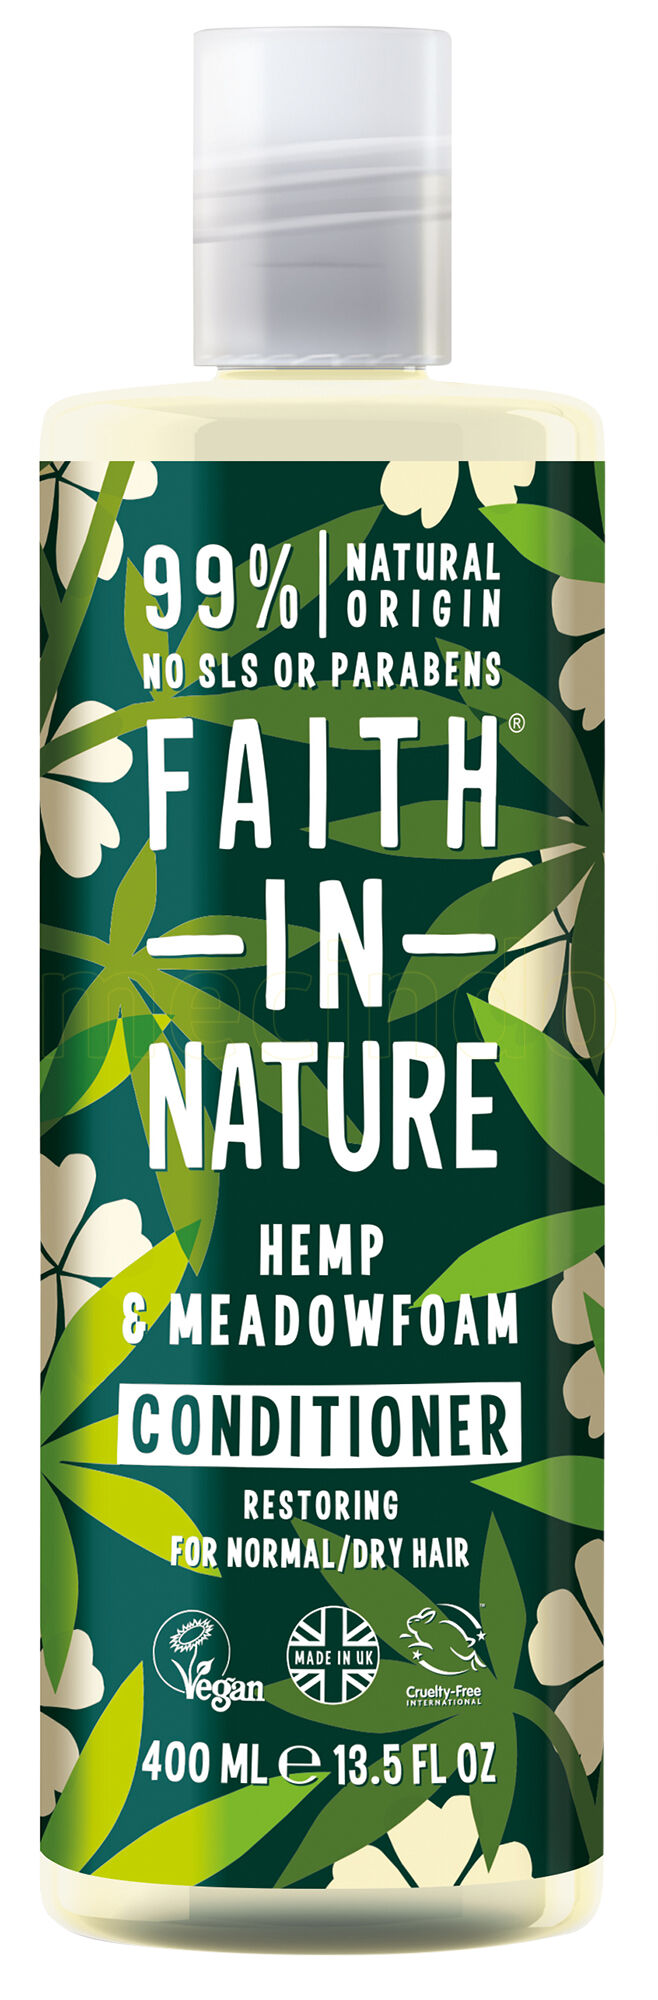 Faith in Nature Balsam Hamp & Engrapgræs - 400 ml